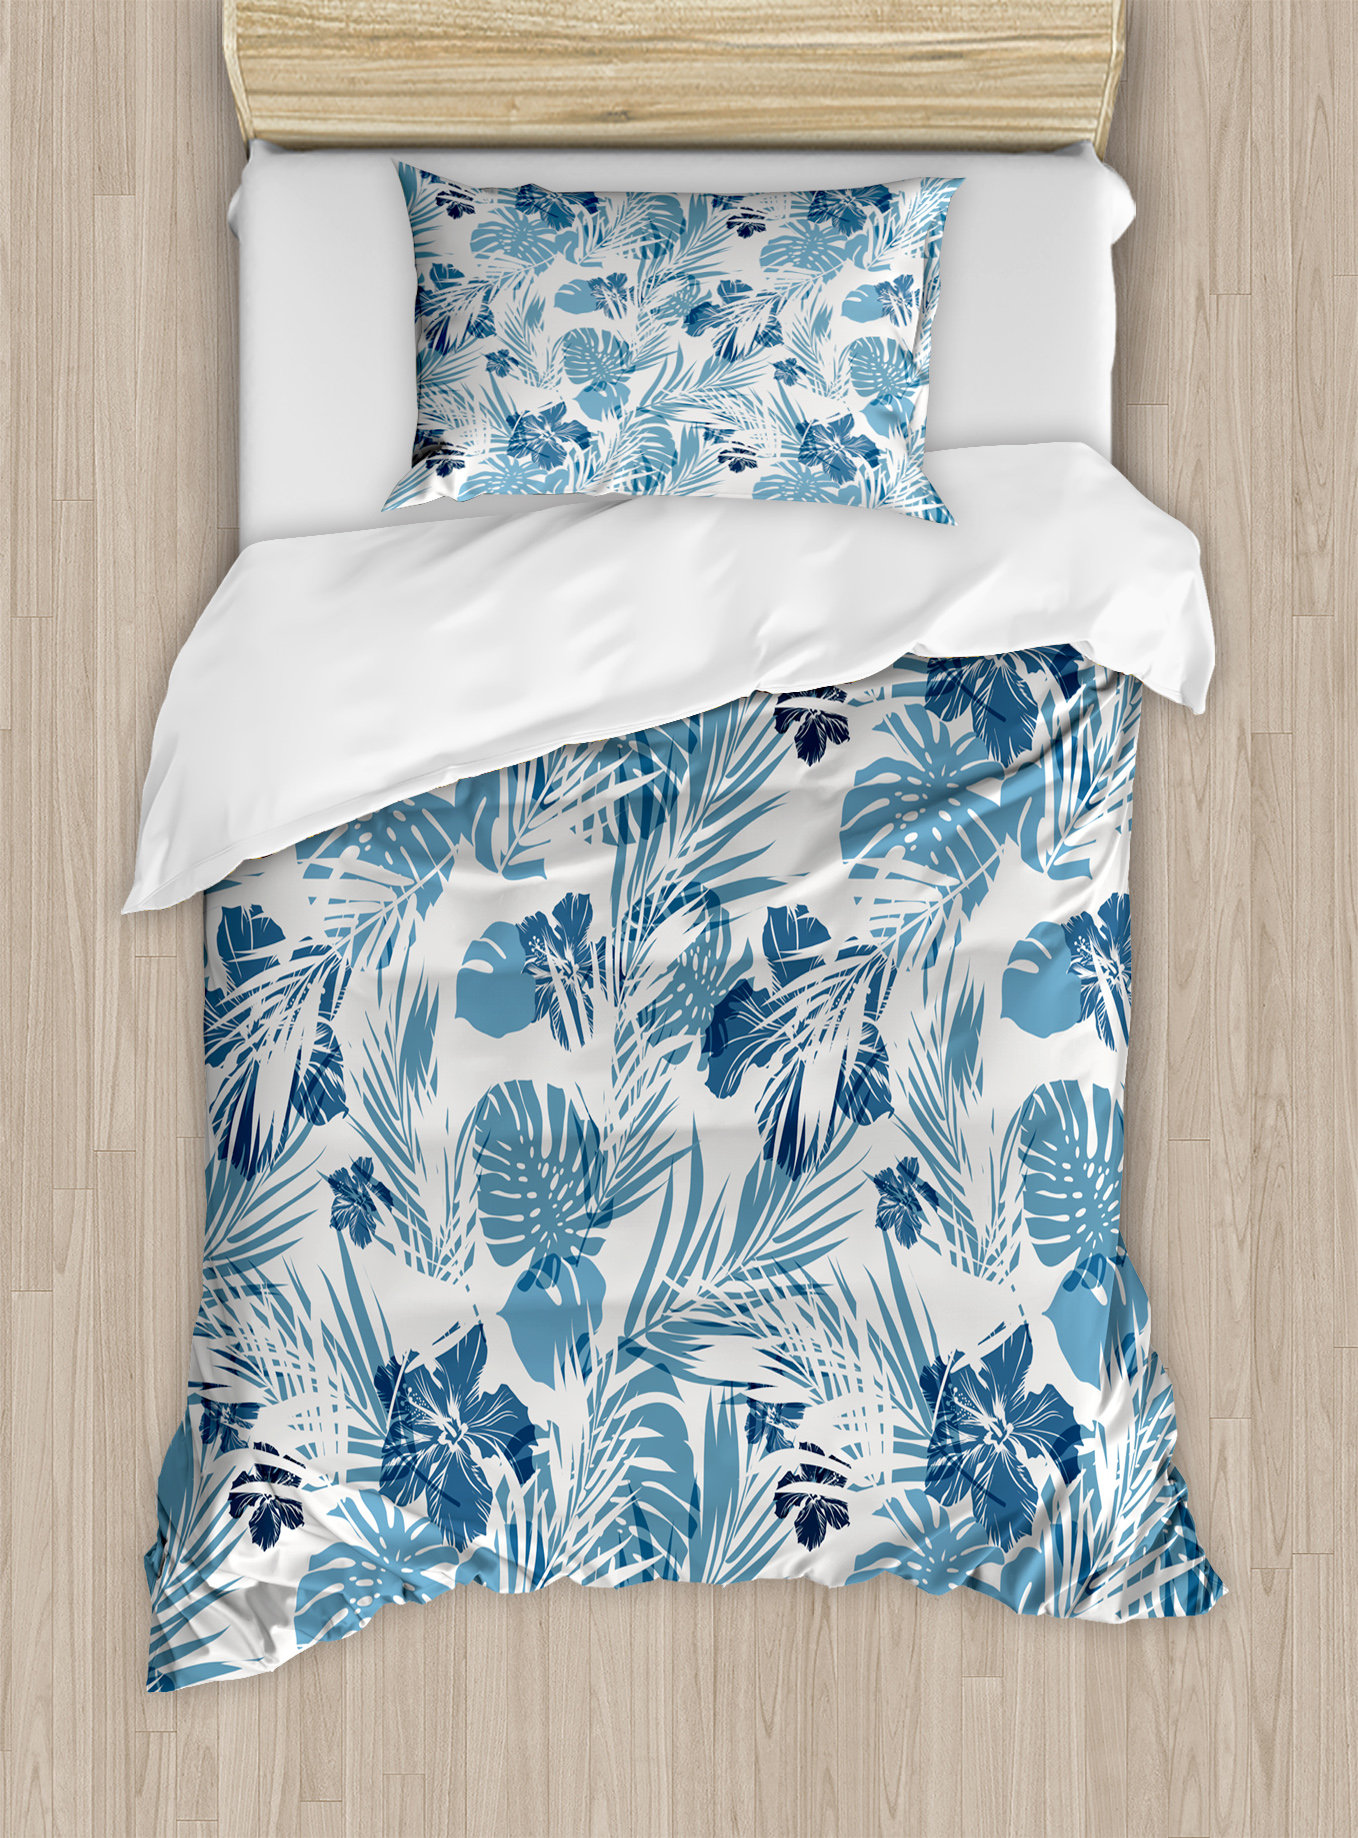 Dark Blue and Sky Blue Hibiscus Hawaiian Tropical Island Flowers Petals and Buds Leaves Art Print Decorative Bedding Scarf and a Pillow Sham for Hotels Homes Ambesonne Navy Bed Runner Set